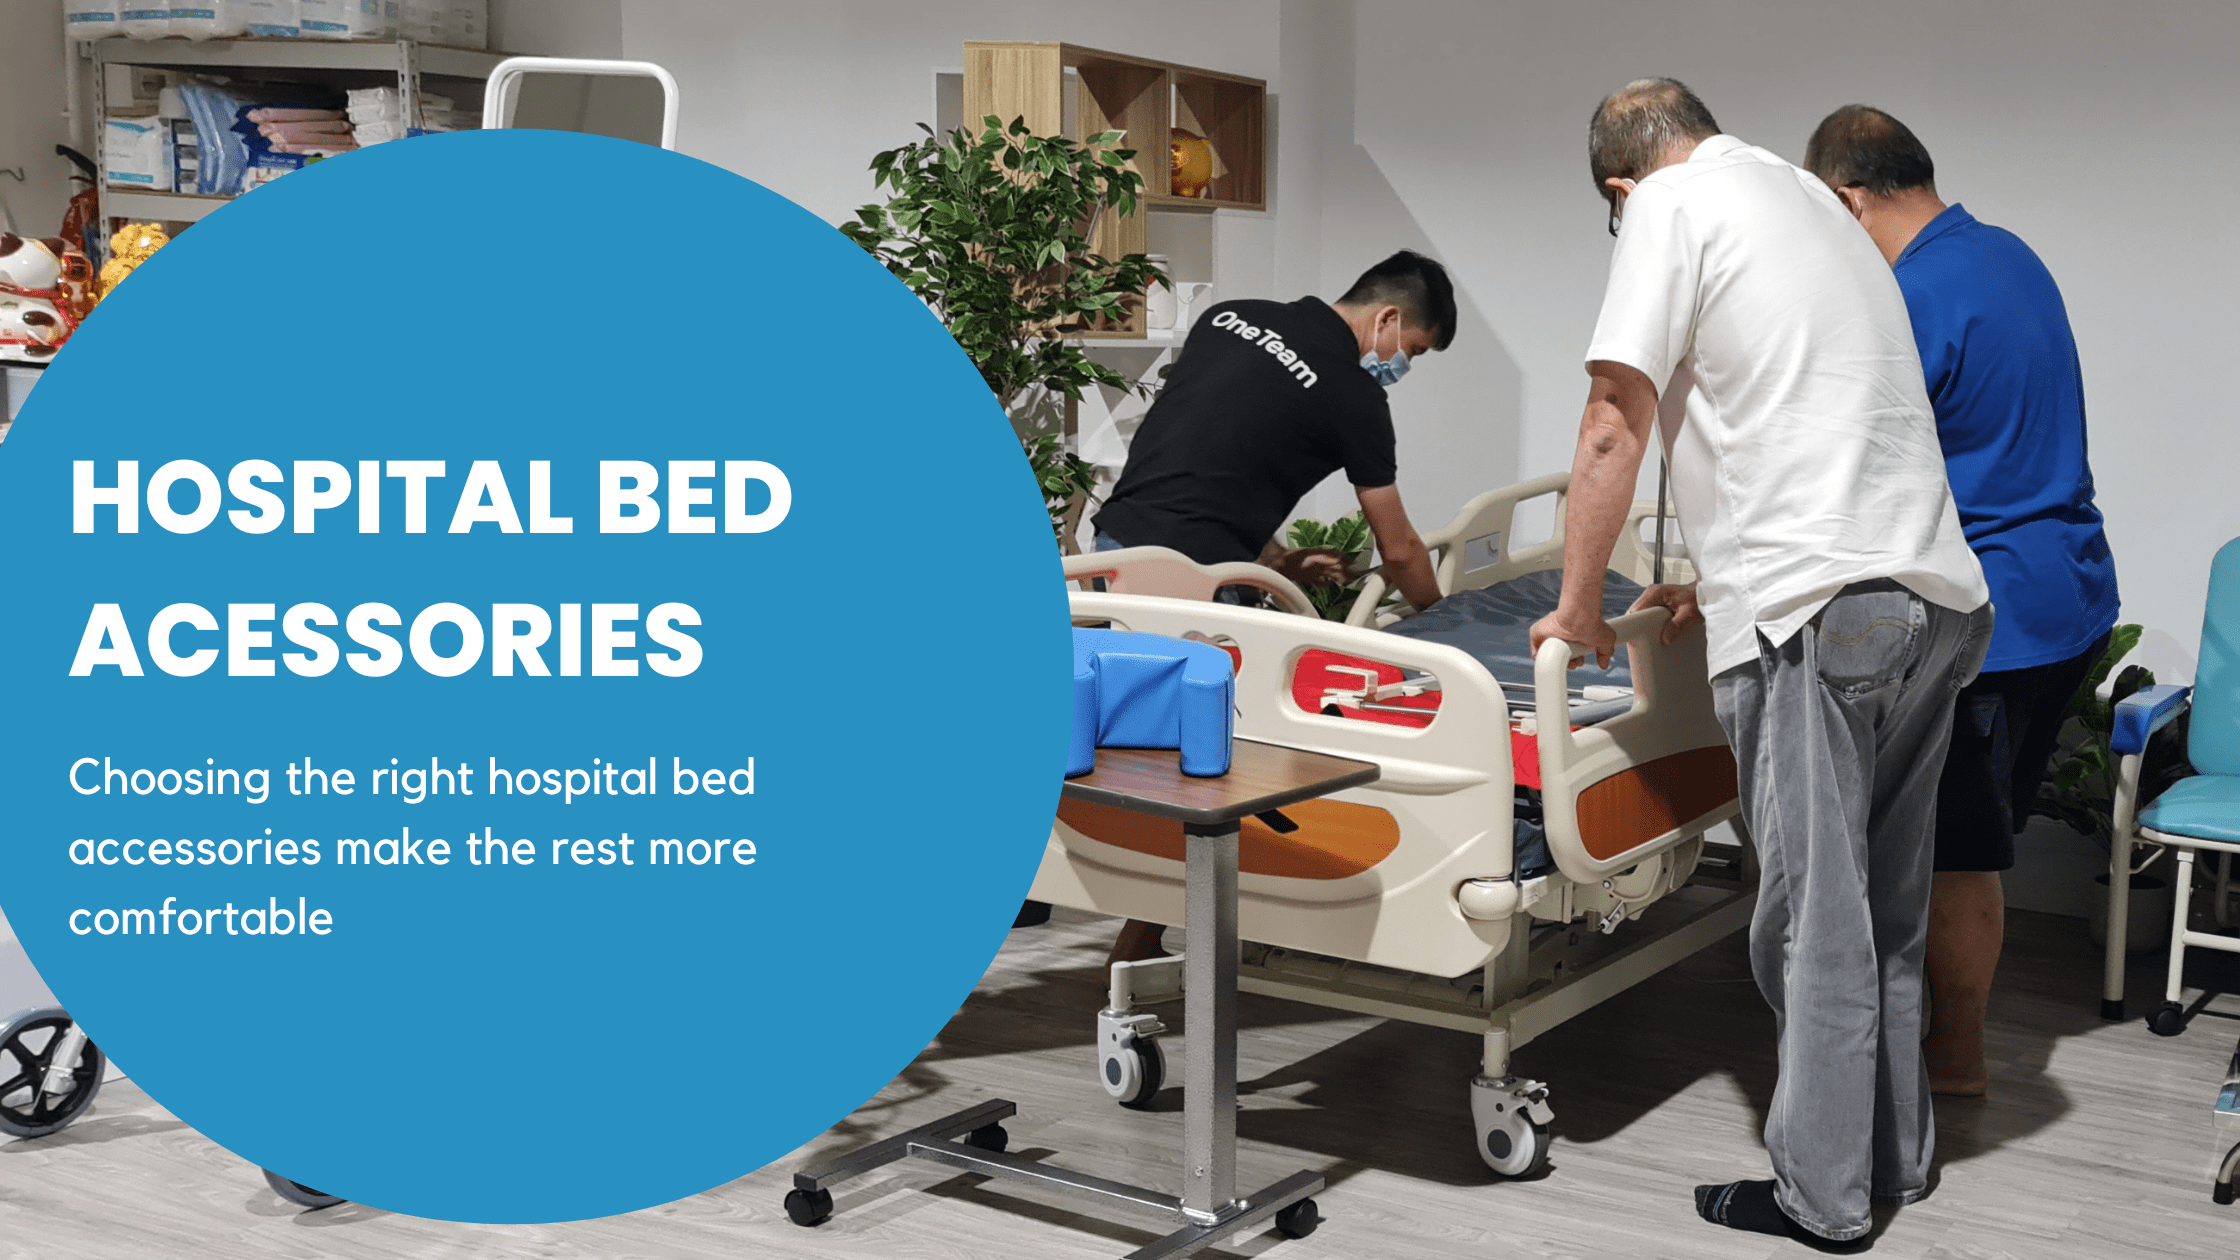 Choose the right hospital bed accessories